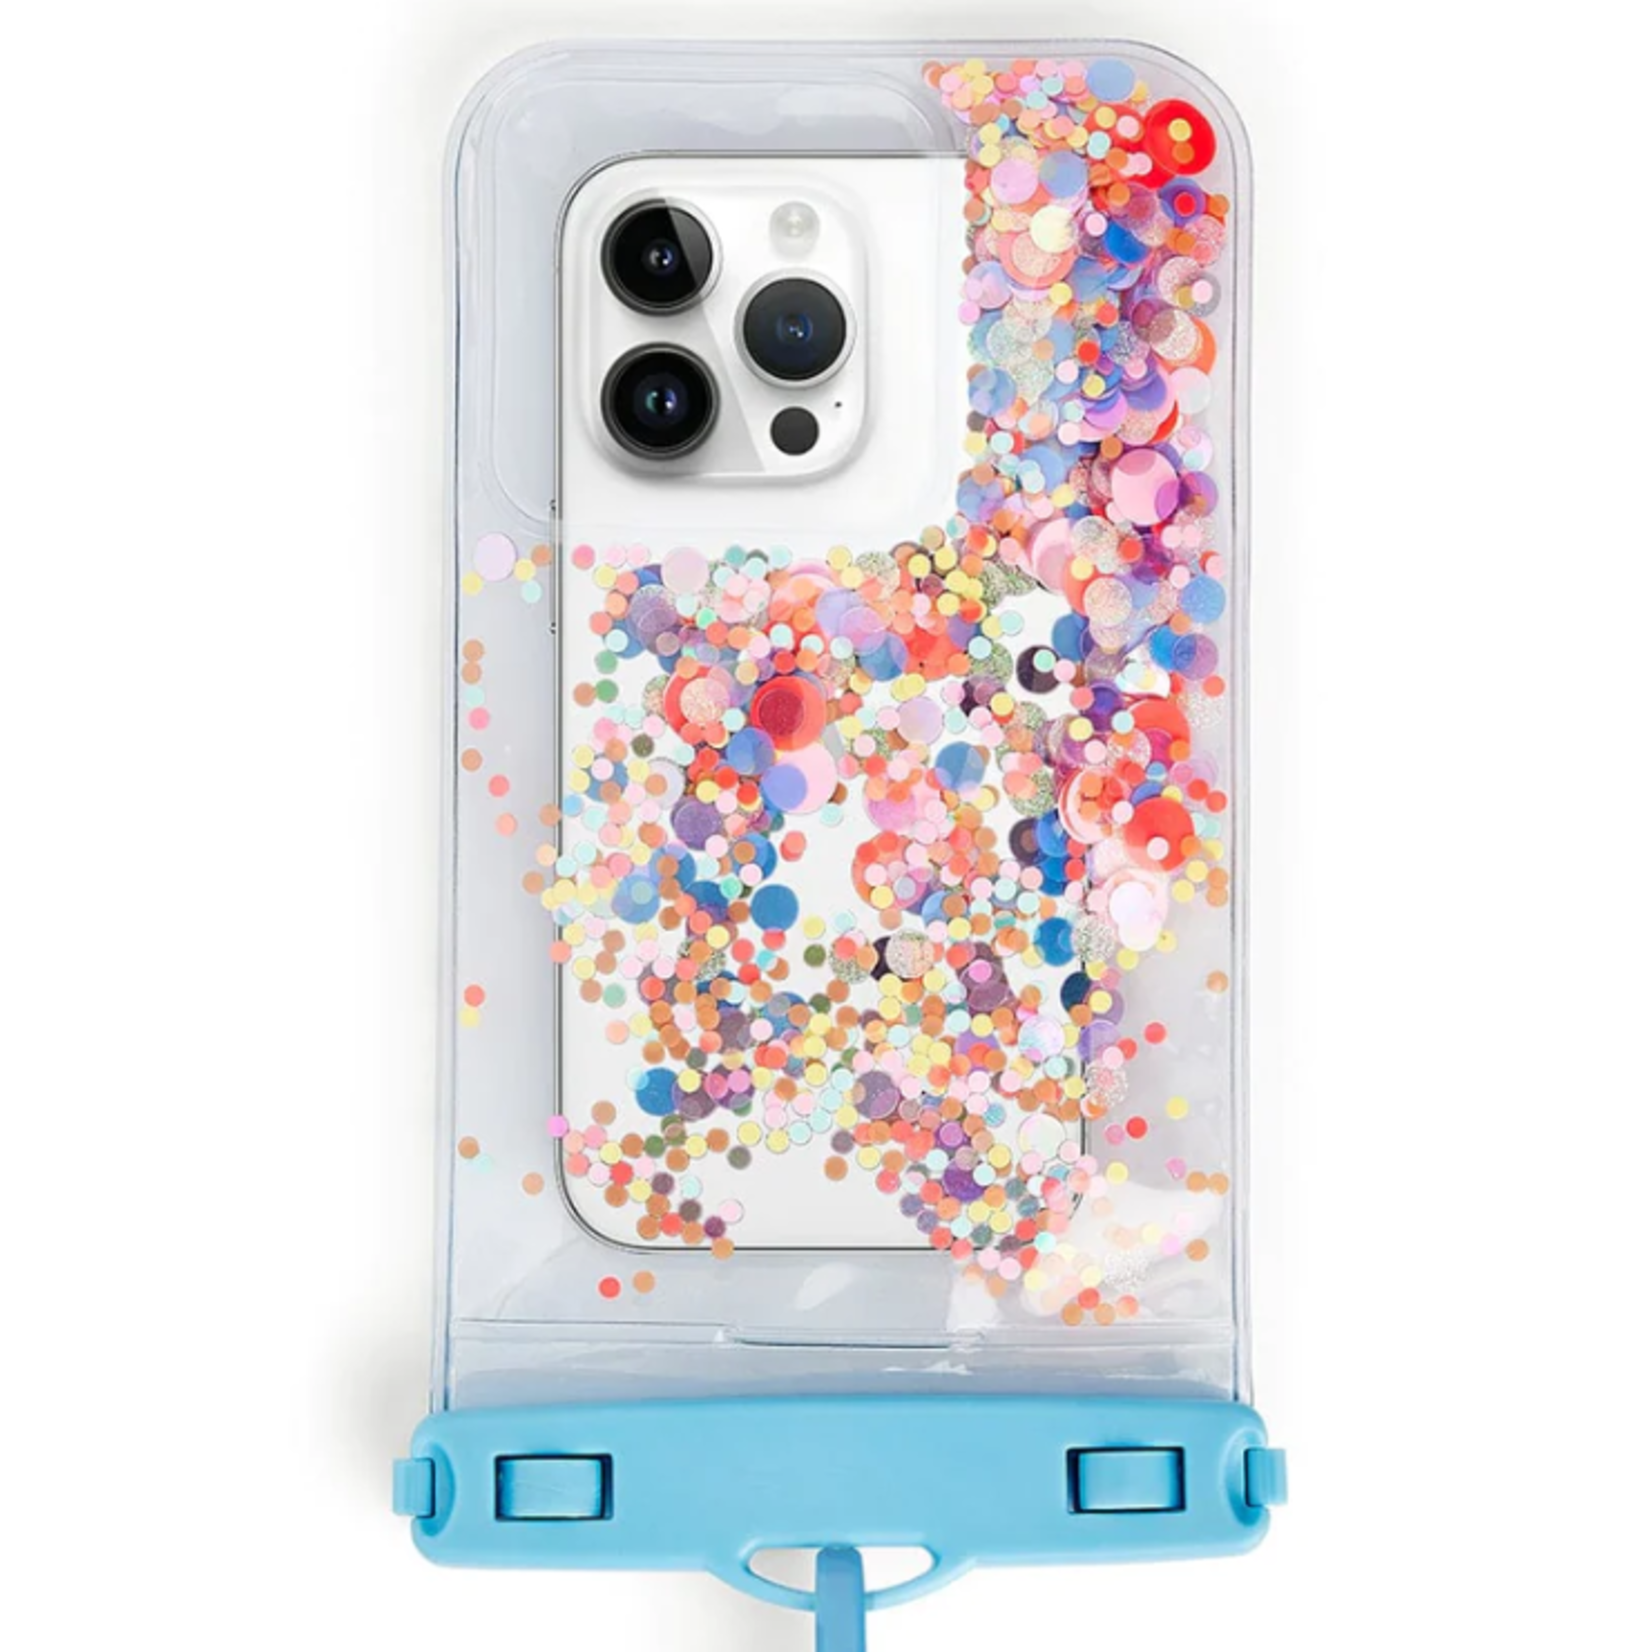 Bring on the Fun Confetti Waterproof Protective Phone Holder